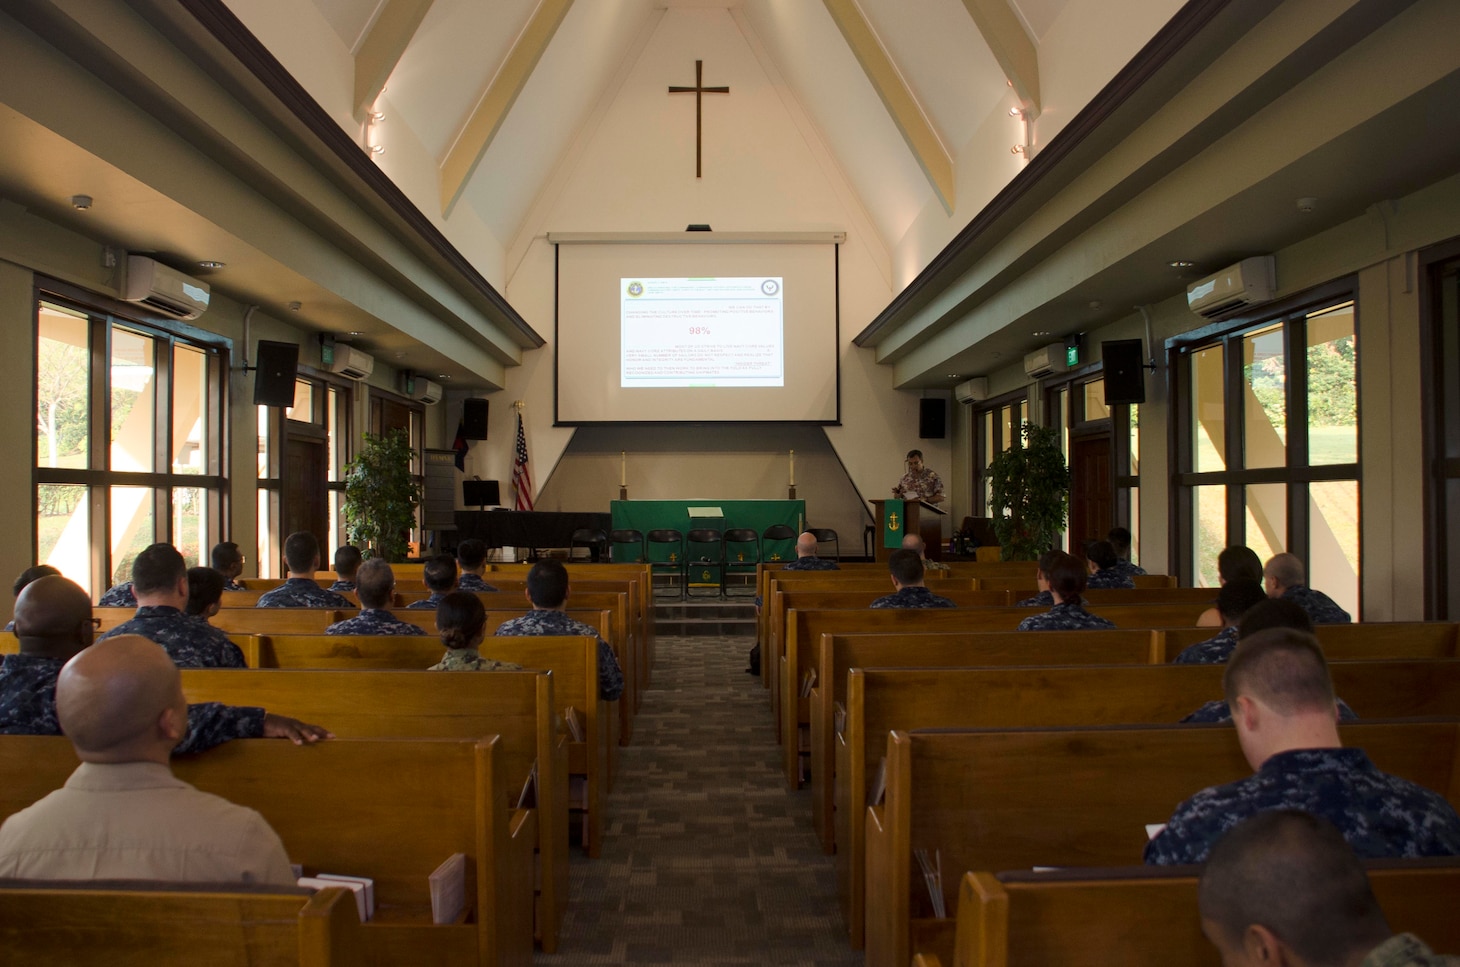 SINGAPORE - Sailors attached to Navy Region Singapore attend a Resilient Workforce Summit workshop held at the chapel, Oct. 31, 2016. (U.S. Navy Photo by Petty Officer 3rd Class Madailein Abbott)